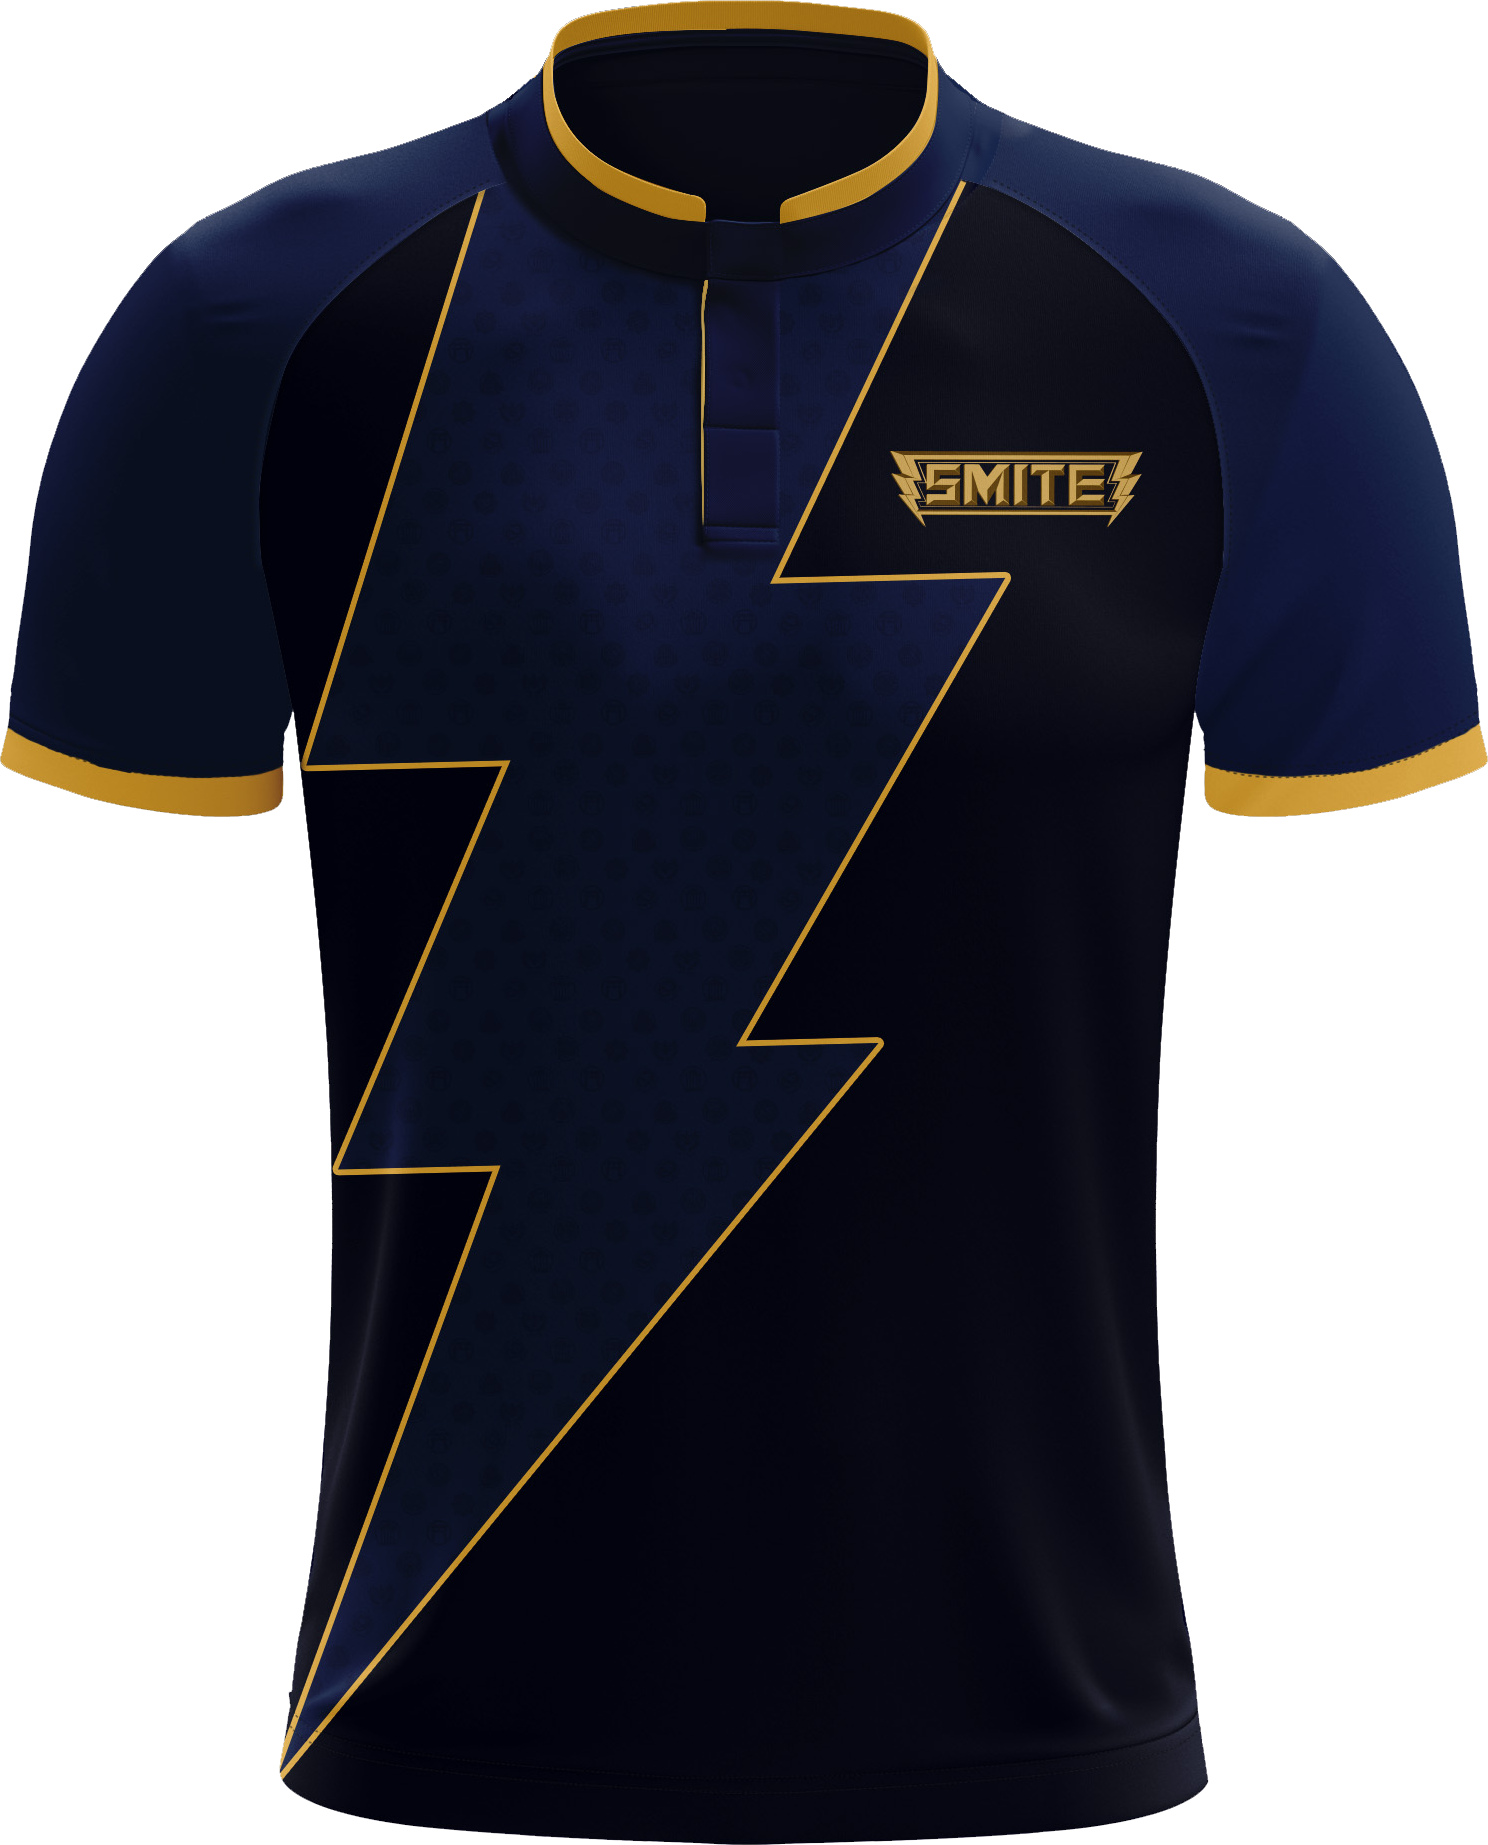 Download SMITE sports jersey - SMITE Official Store